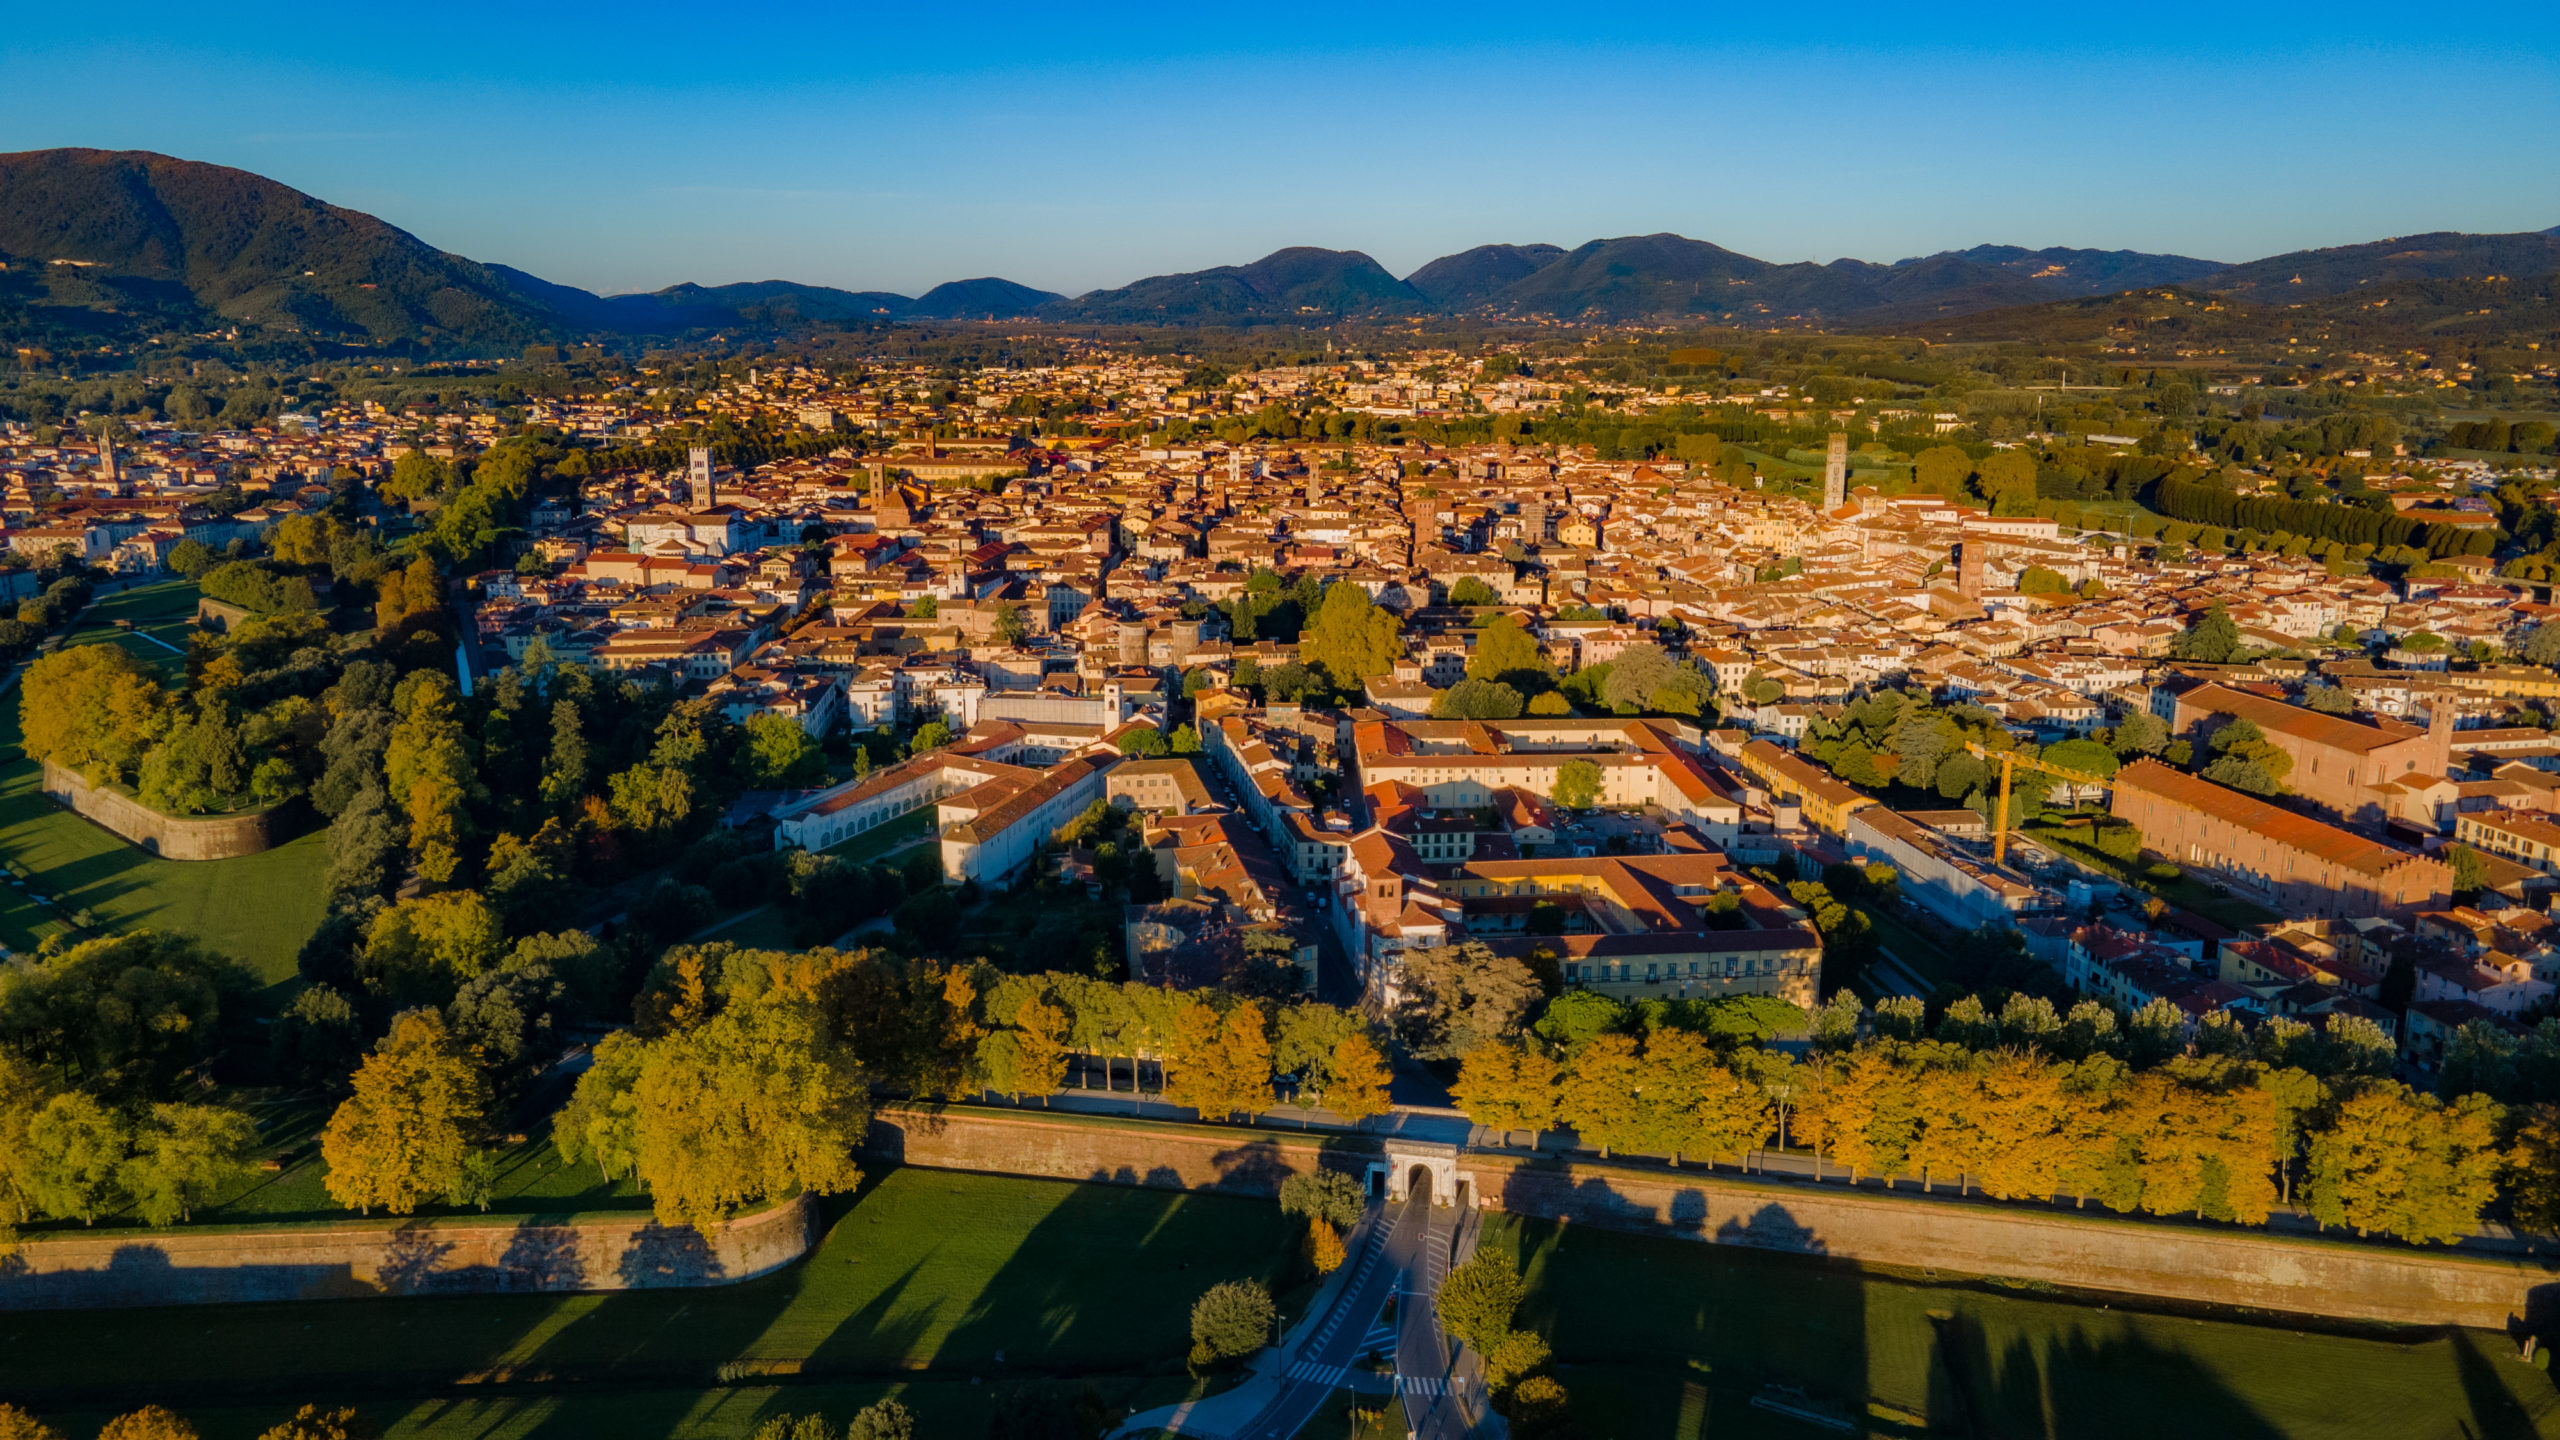 Aereal view of the city of Lucca (Tuscany)